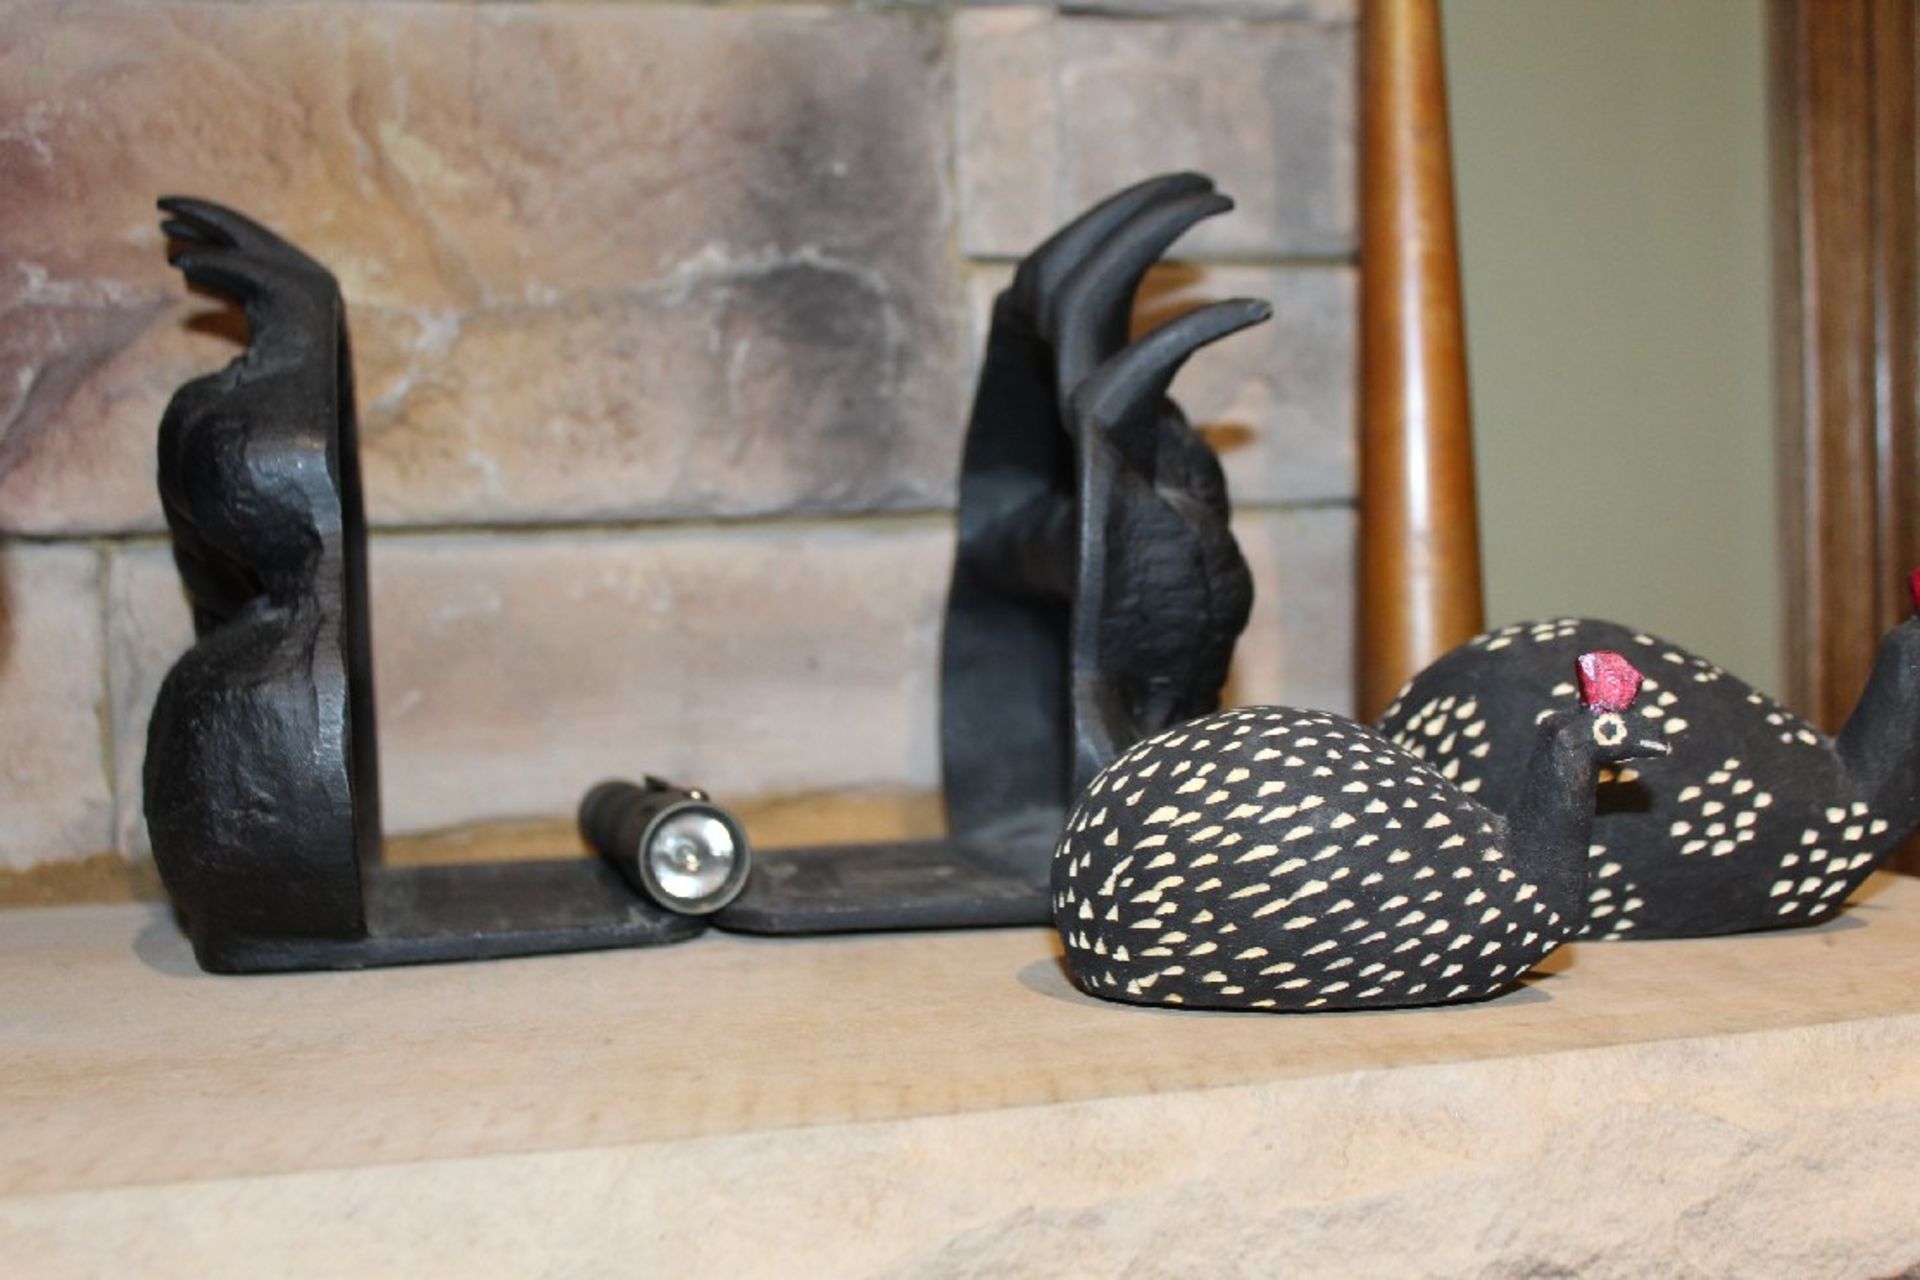 Contents of Fireplace Mantel, Pair of Small Carved Wooden Hippos, Carved Wooden Elephant, Large - Image 5 of 6